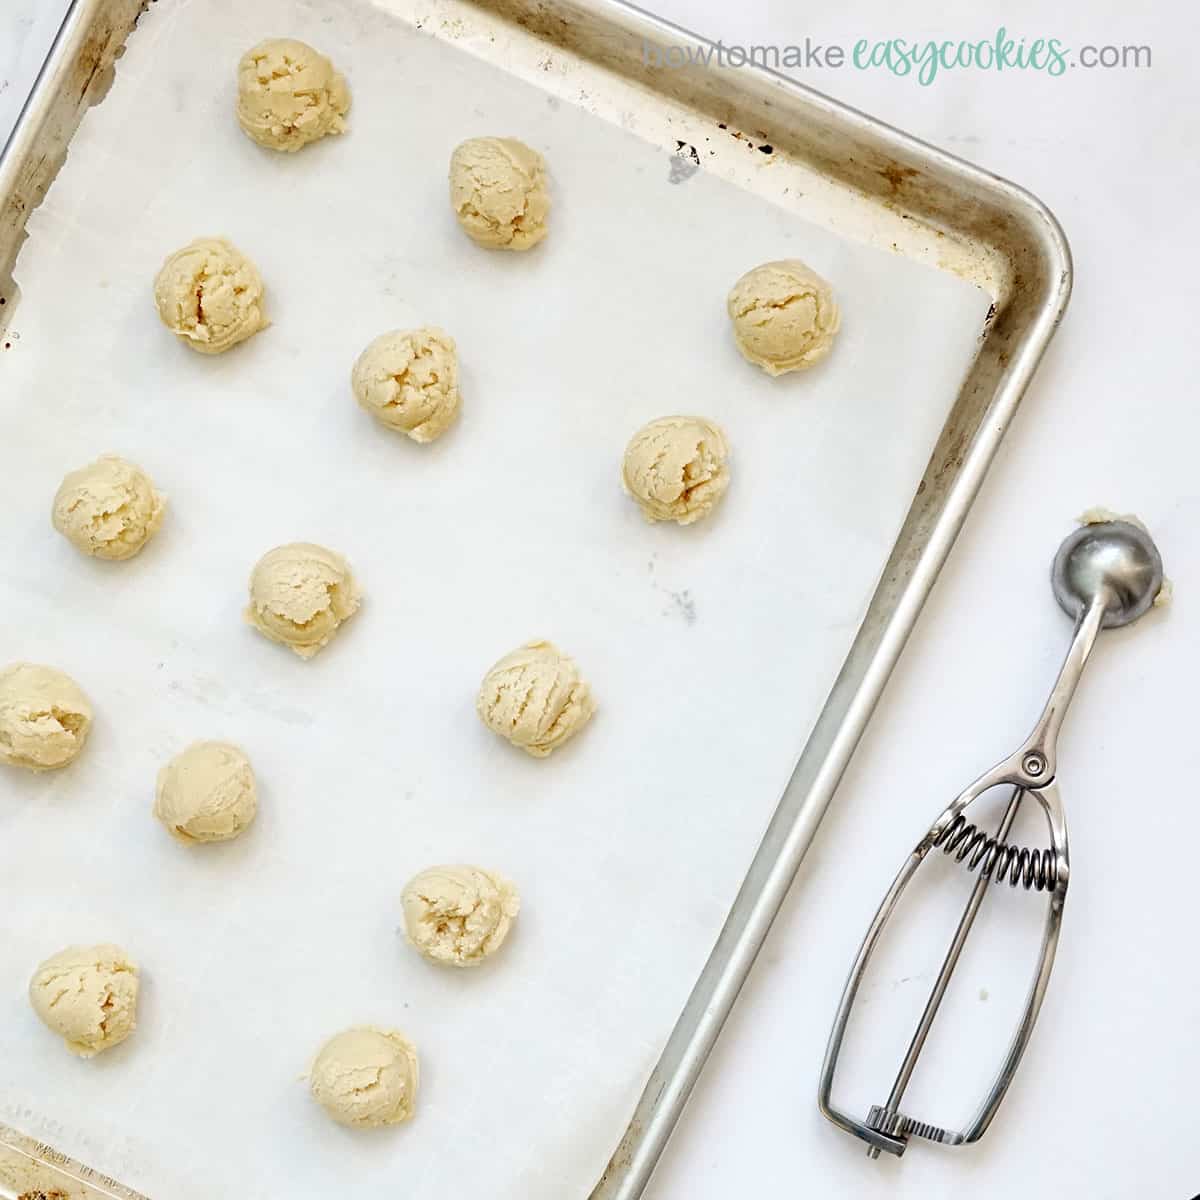 balls of cookie dough on baking tray and cookie scoop